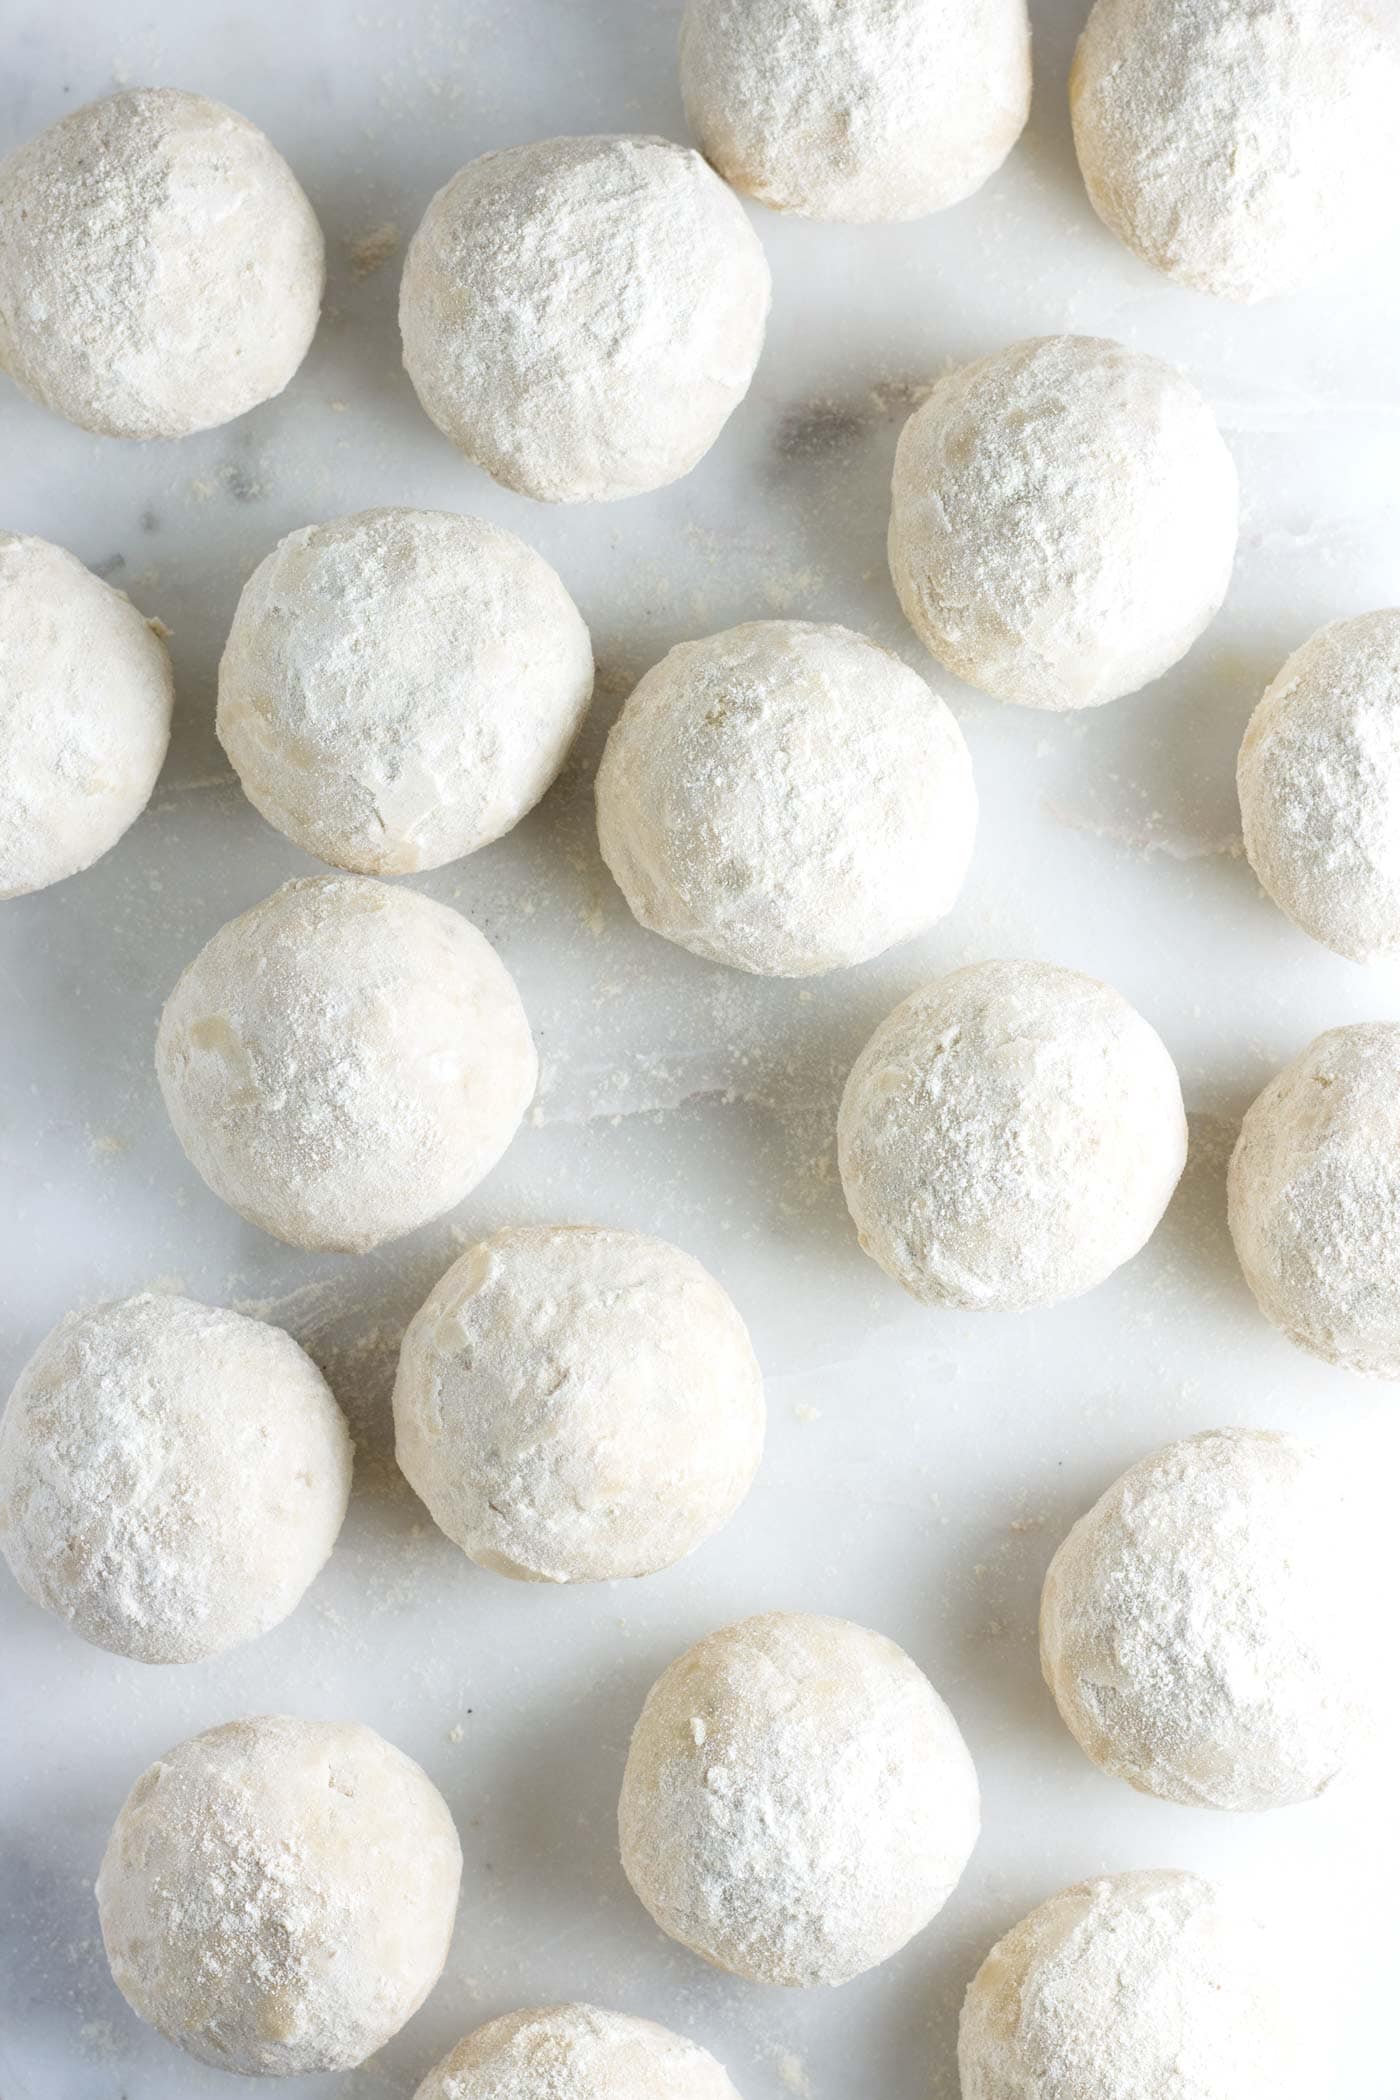 Everyone's holiday favorite turned paleo! These delicious Russian tea cakes are now gluten free, paleo, and can be made low carb and even keto! 